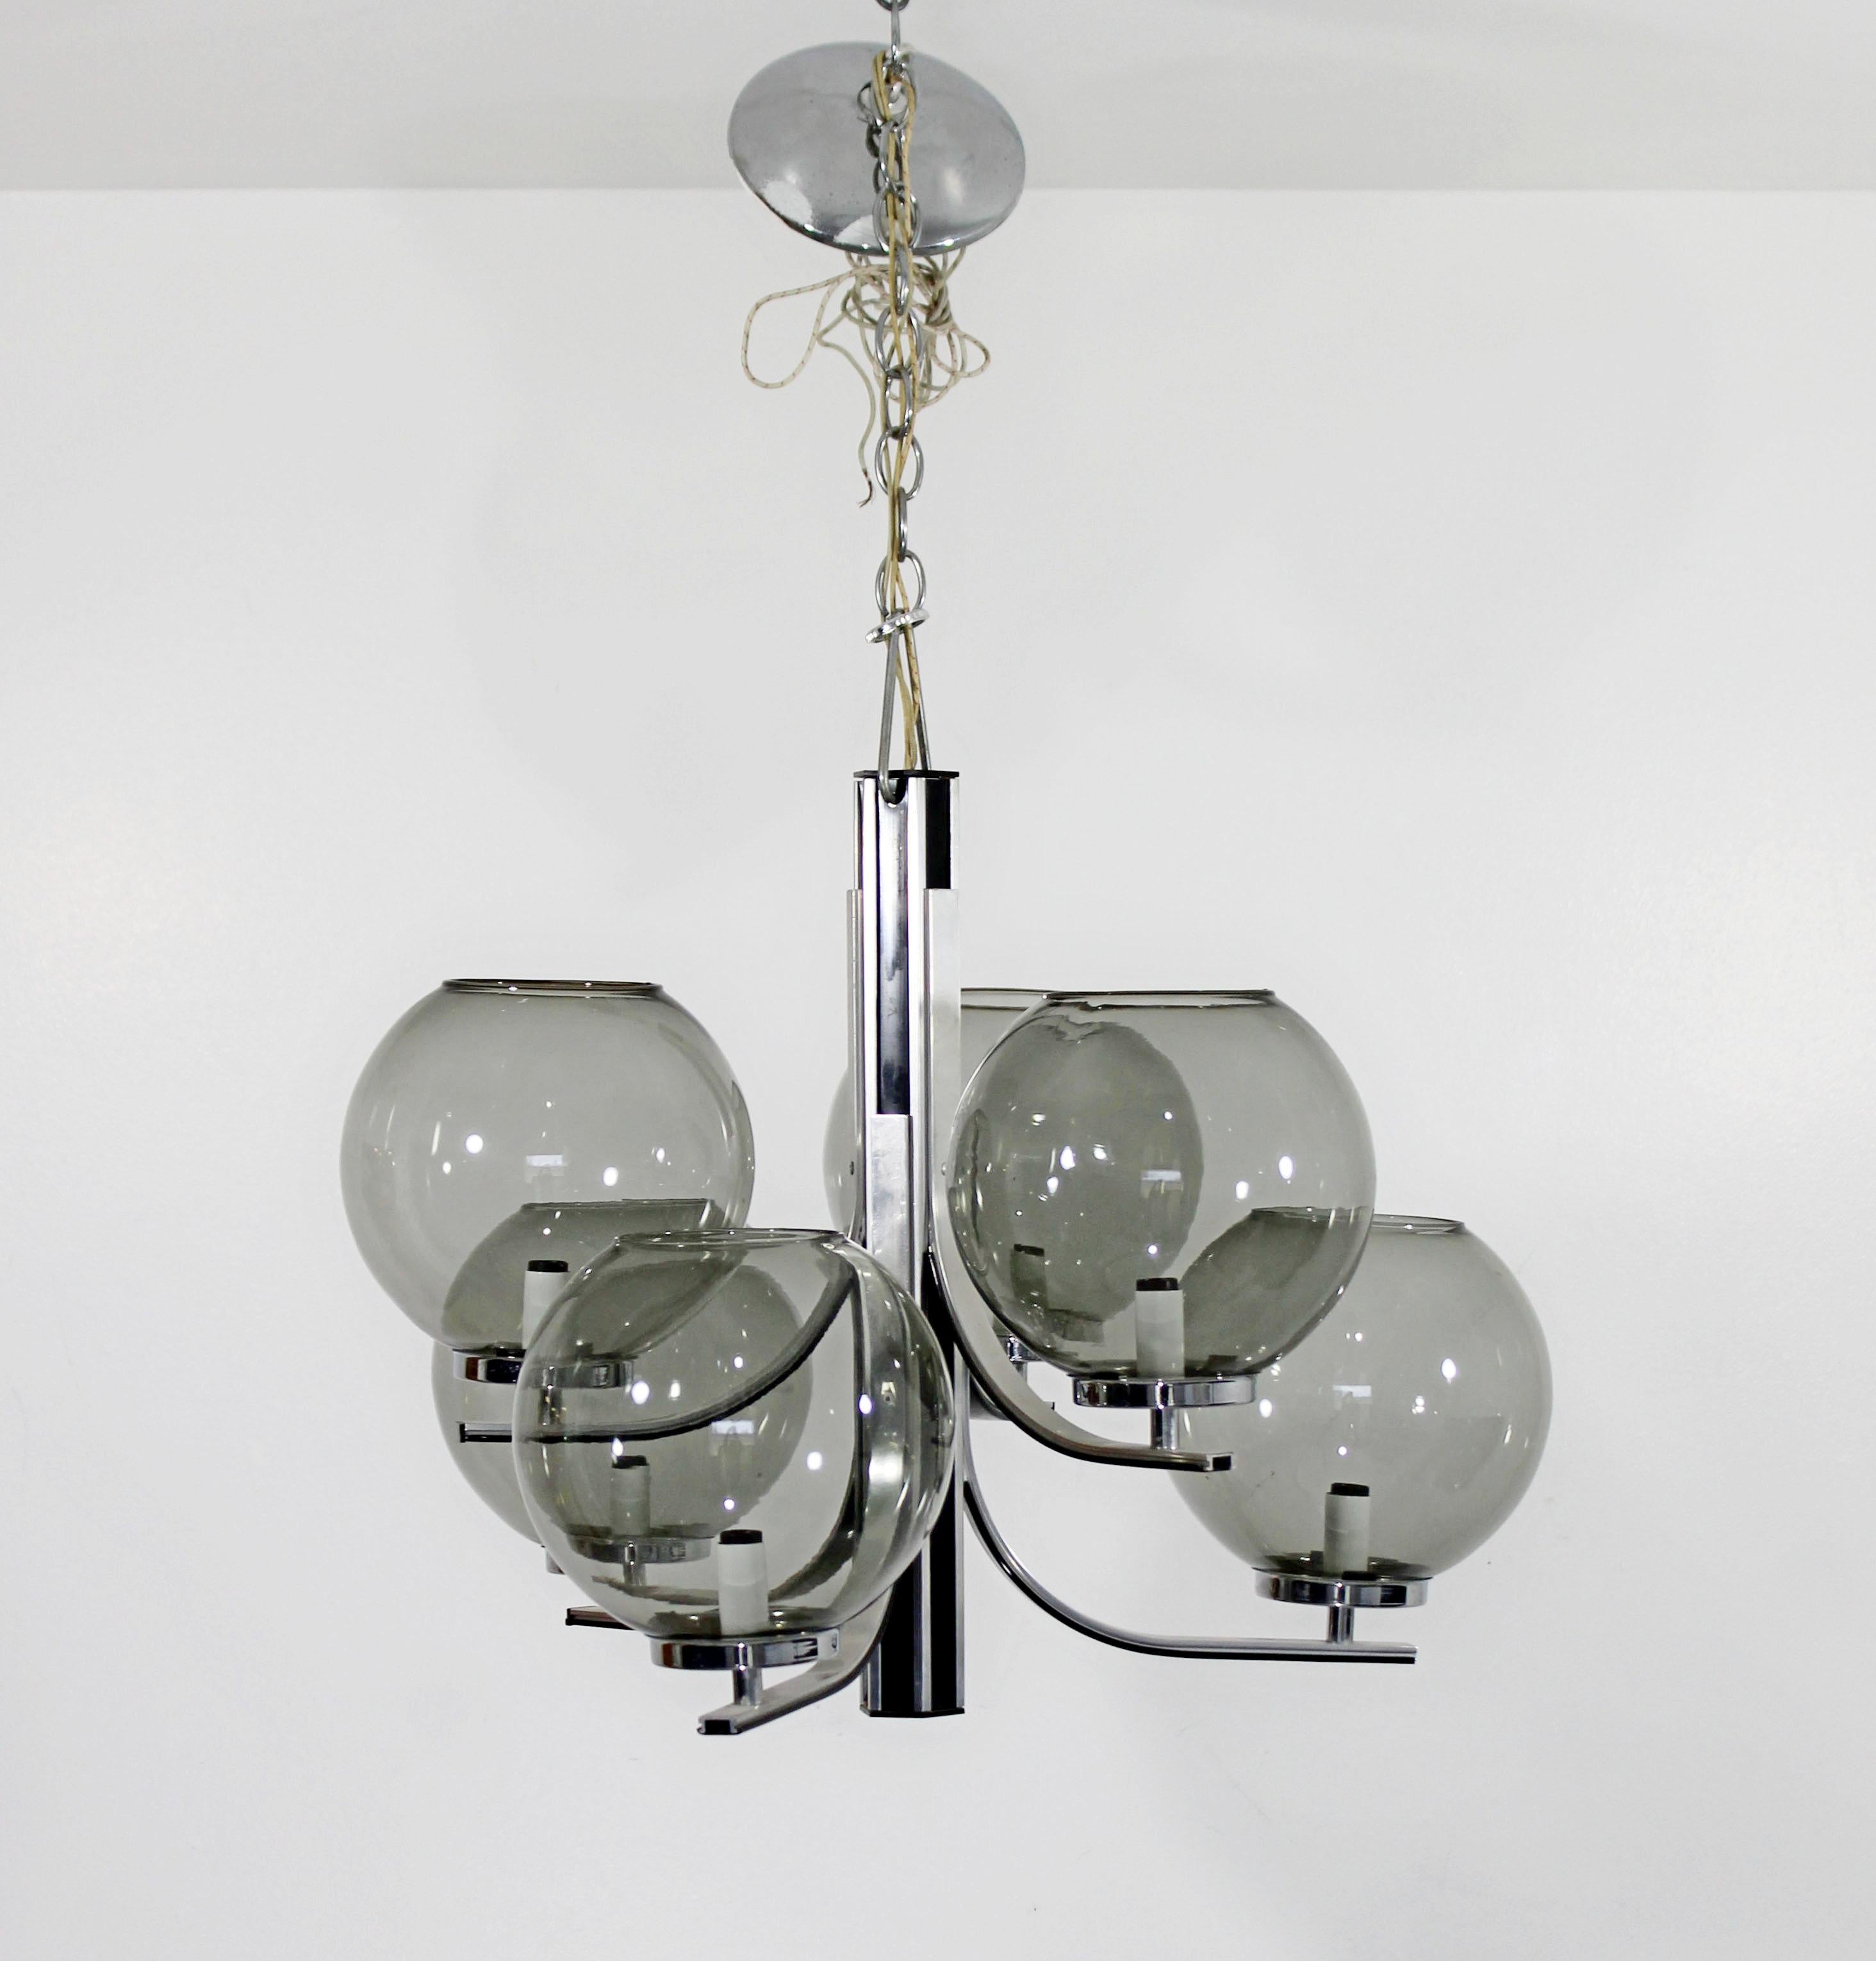 For your consideration is a fantastic, chrome chandelier, with six smoked glass globes by Lightolier, circa 1970s. In very good condition. The dimensions are 20